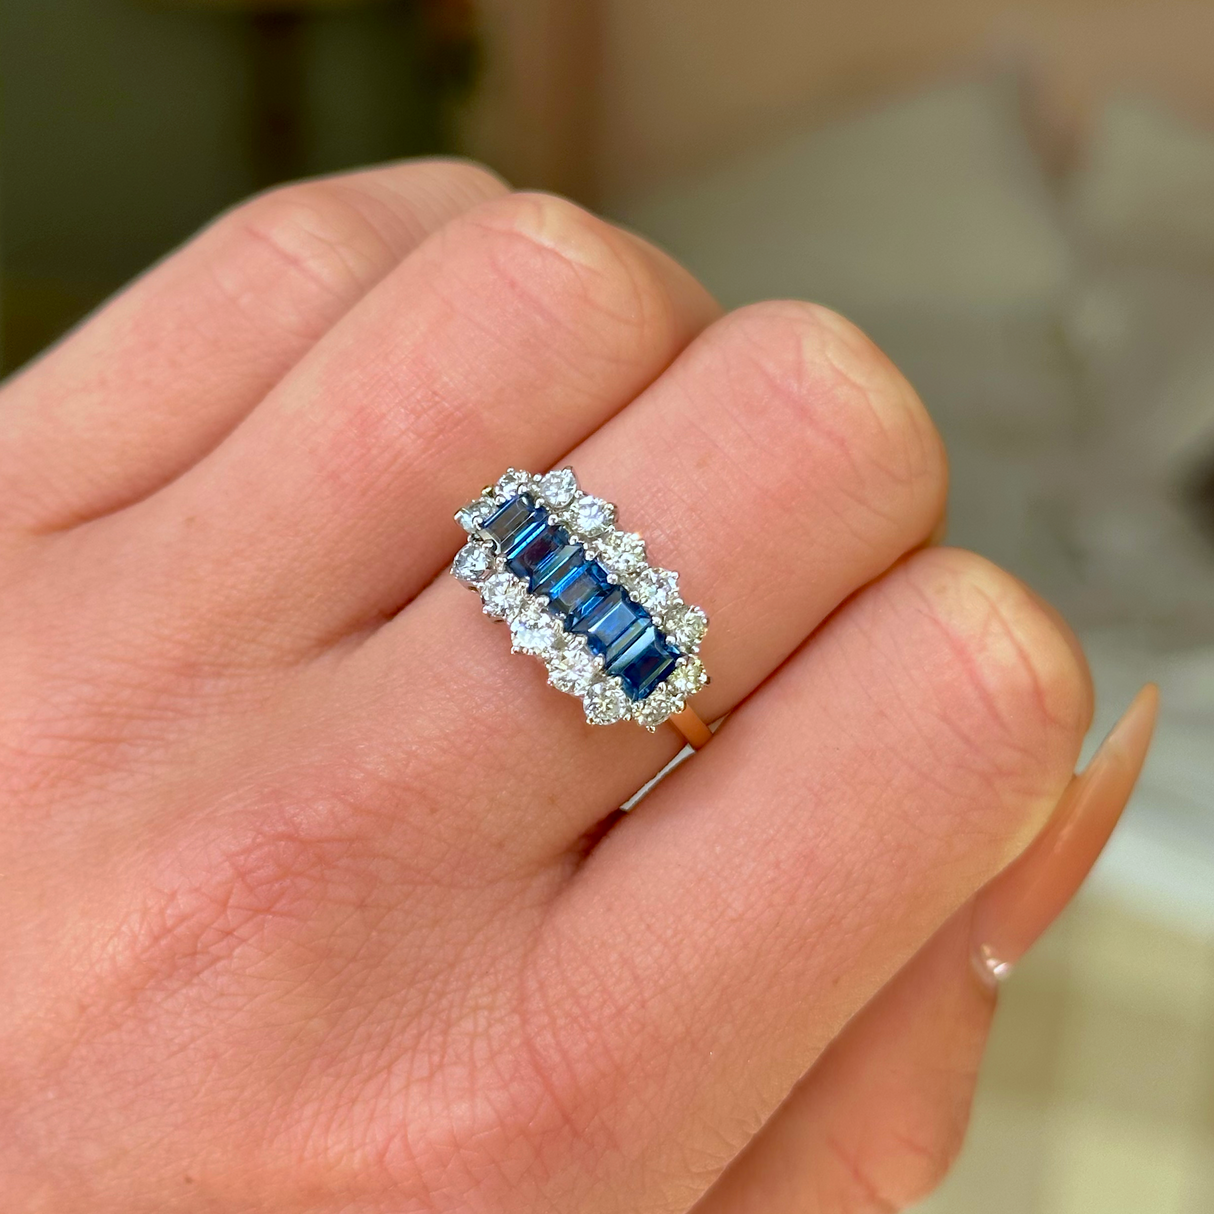 Vintage, 1950s Sapphire and Diamond Cocktail Ring, 18ct Yellow Gold and Platinum worn on hand.